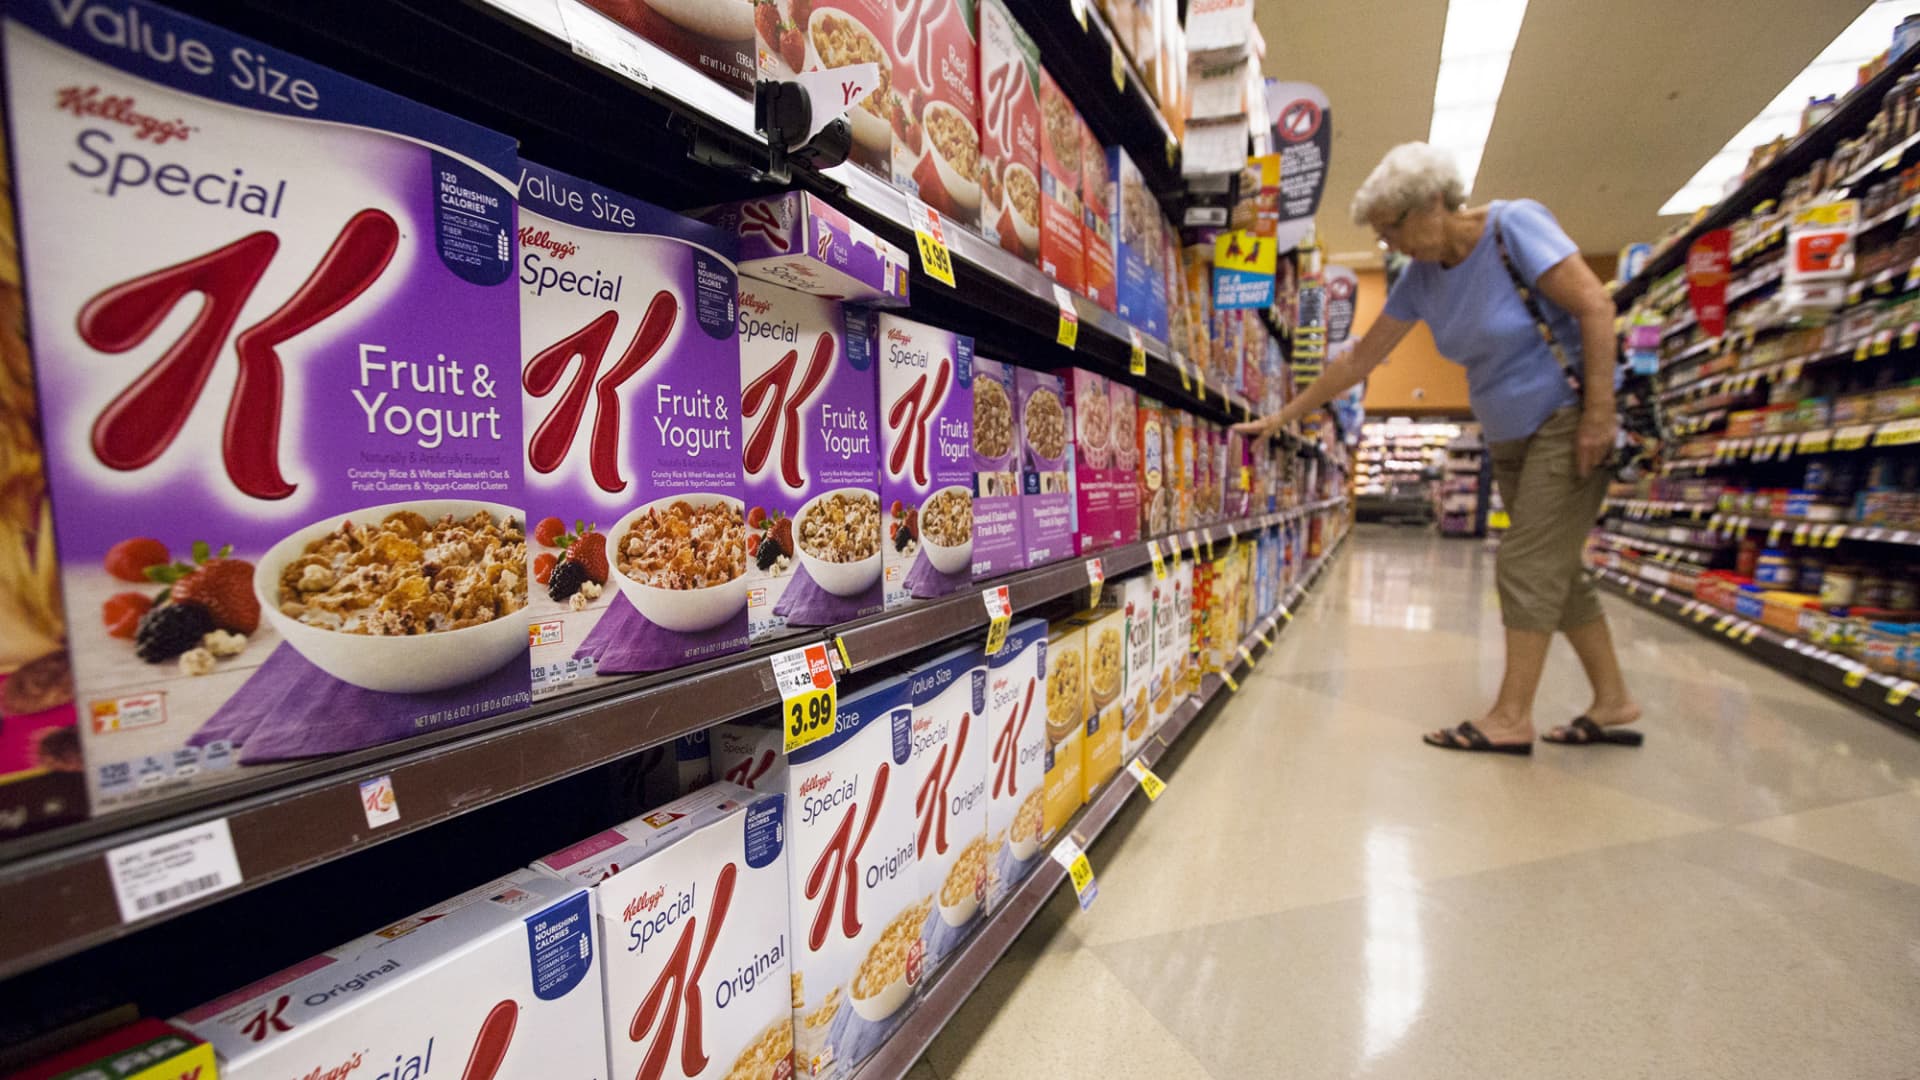 Kellogg will find it difficult to pass through inflation from here, UBS says